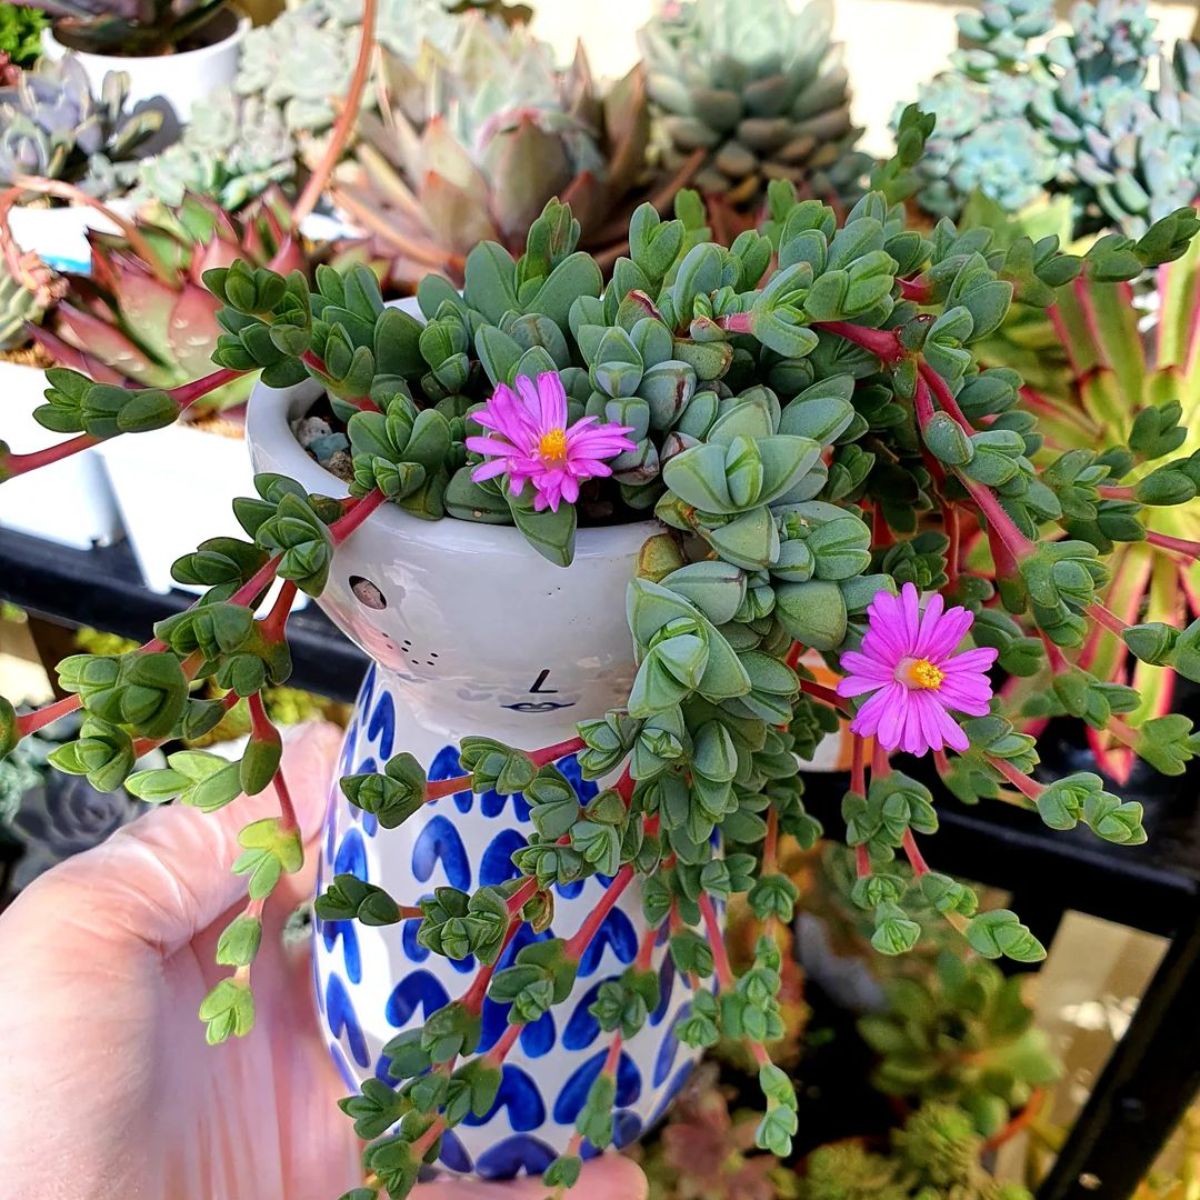 Braunsia maximiliani small succulent with two pink flowers, grows in a pot held by hand.